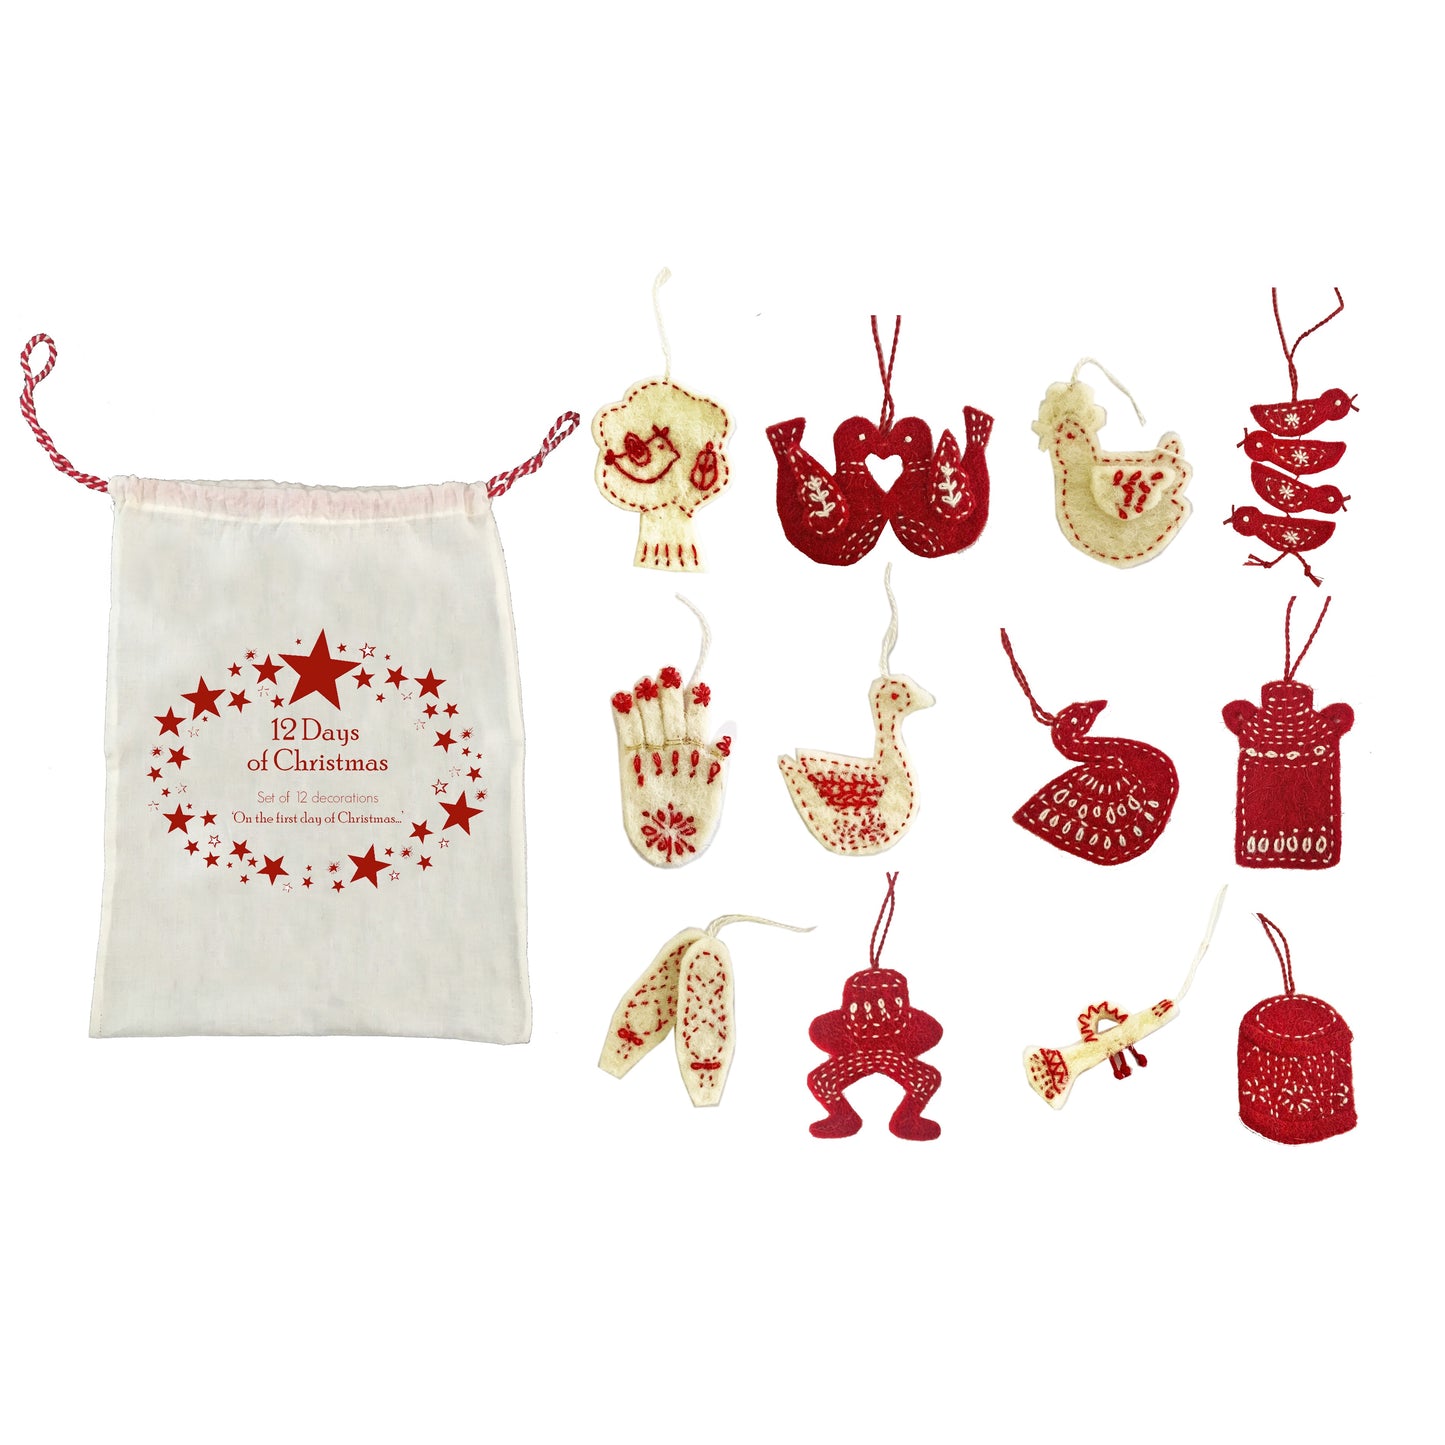 The 12 Days of Christmas Hanging Decorations - Set of 12 in a bag